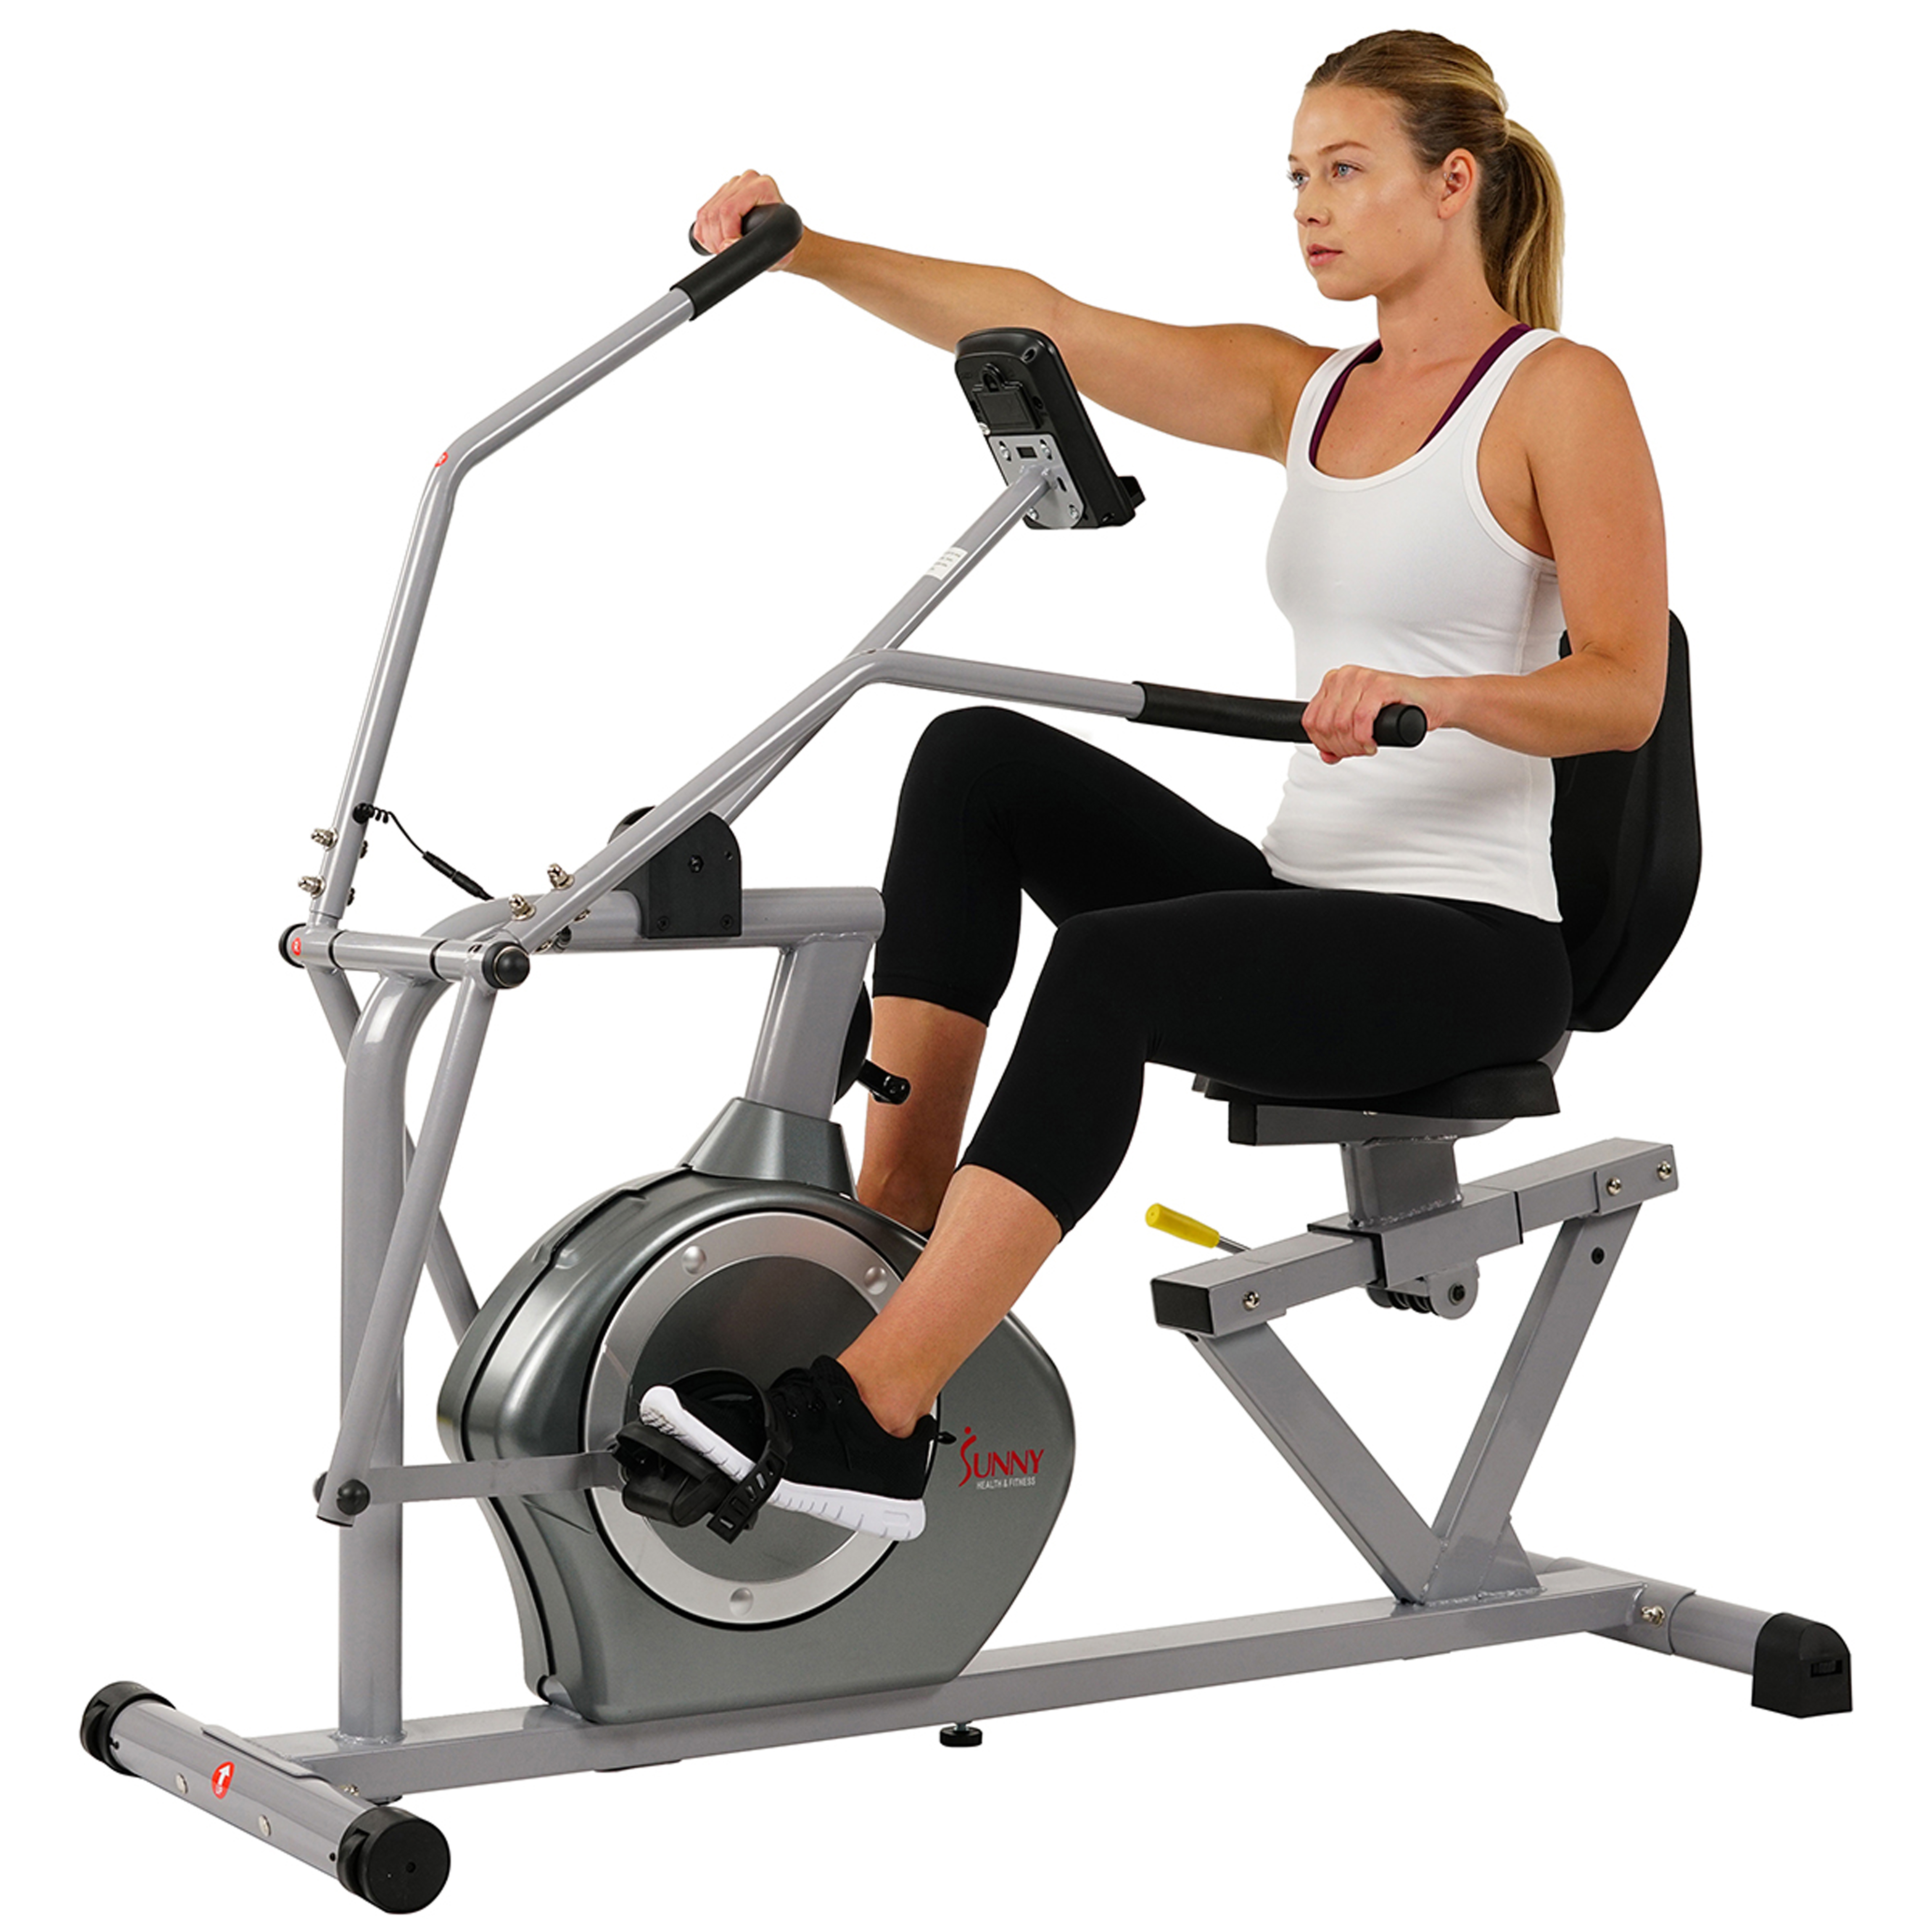 Sunny Health & Fitness Magnetic Recumbent Bike Exercise Bike, 350lb High Weight Capacity, Cross Training, Arm Exercisers, Monitor, Pulse Rate Monitoring - SF-RB4708 - image 3 of 5